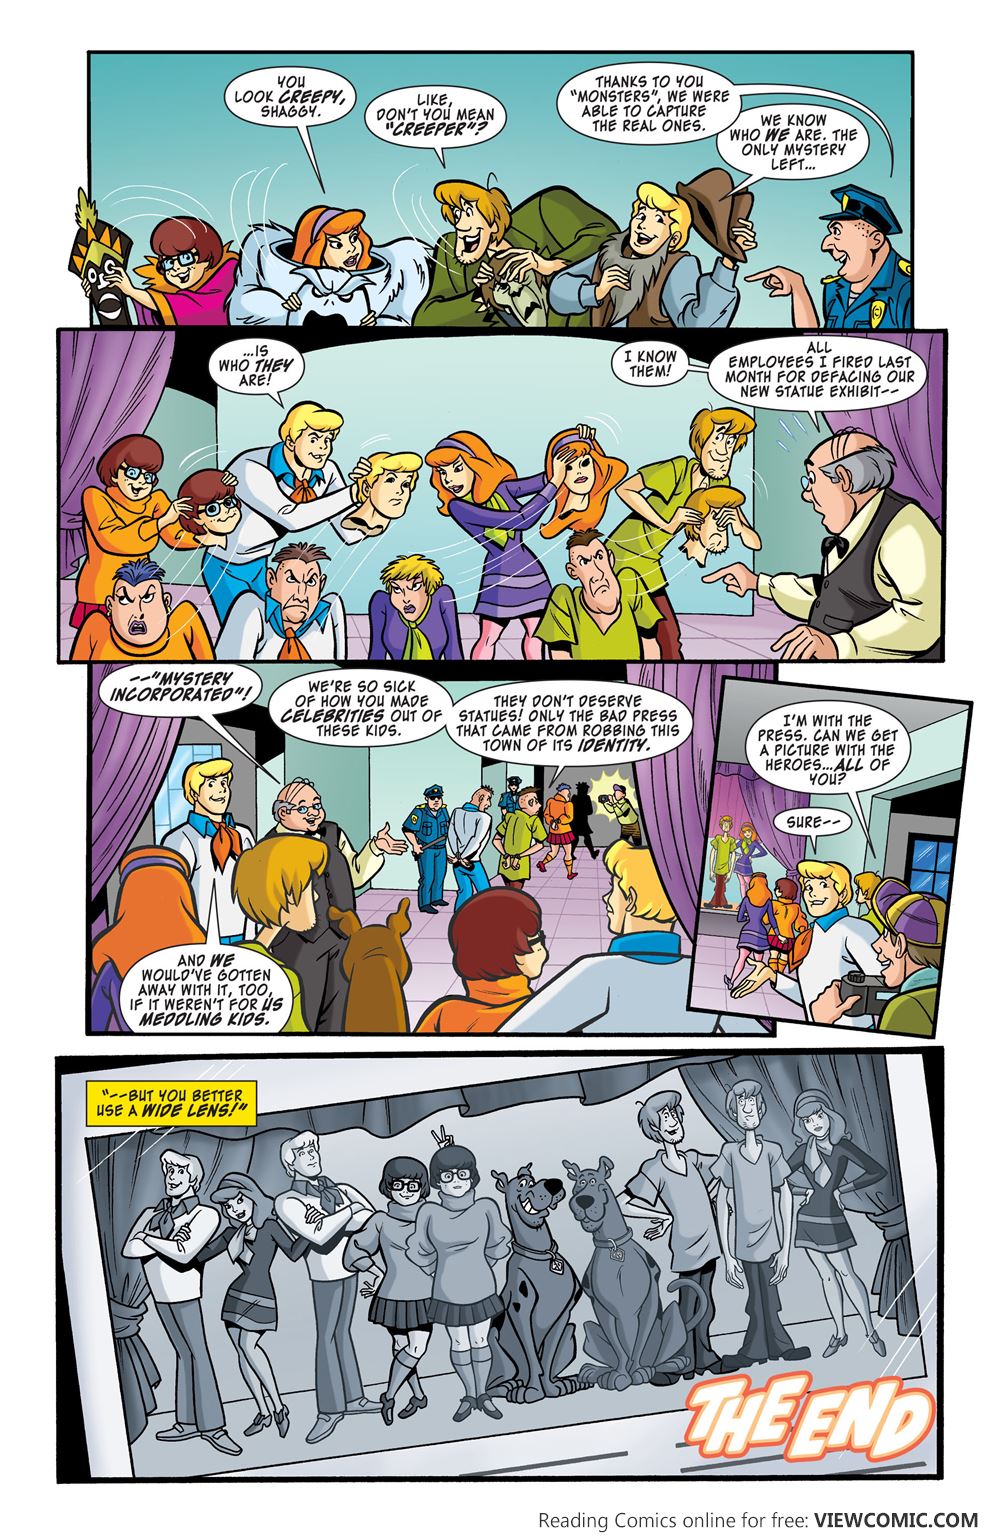 Shooby Doo Creeper Porn - Scooby Doo Where Are You 064 2016 | Read Scooby Doo Where Are You 064 2016  comic online in high quality. Read Full Comic online for free - Read comics  online in high quality .